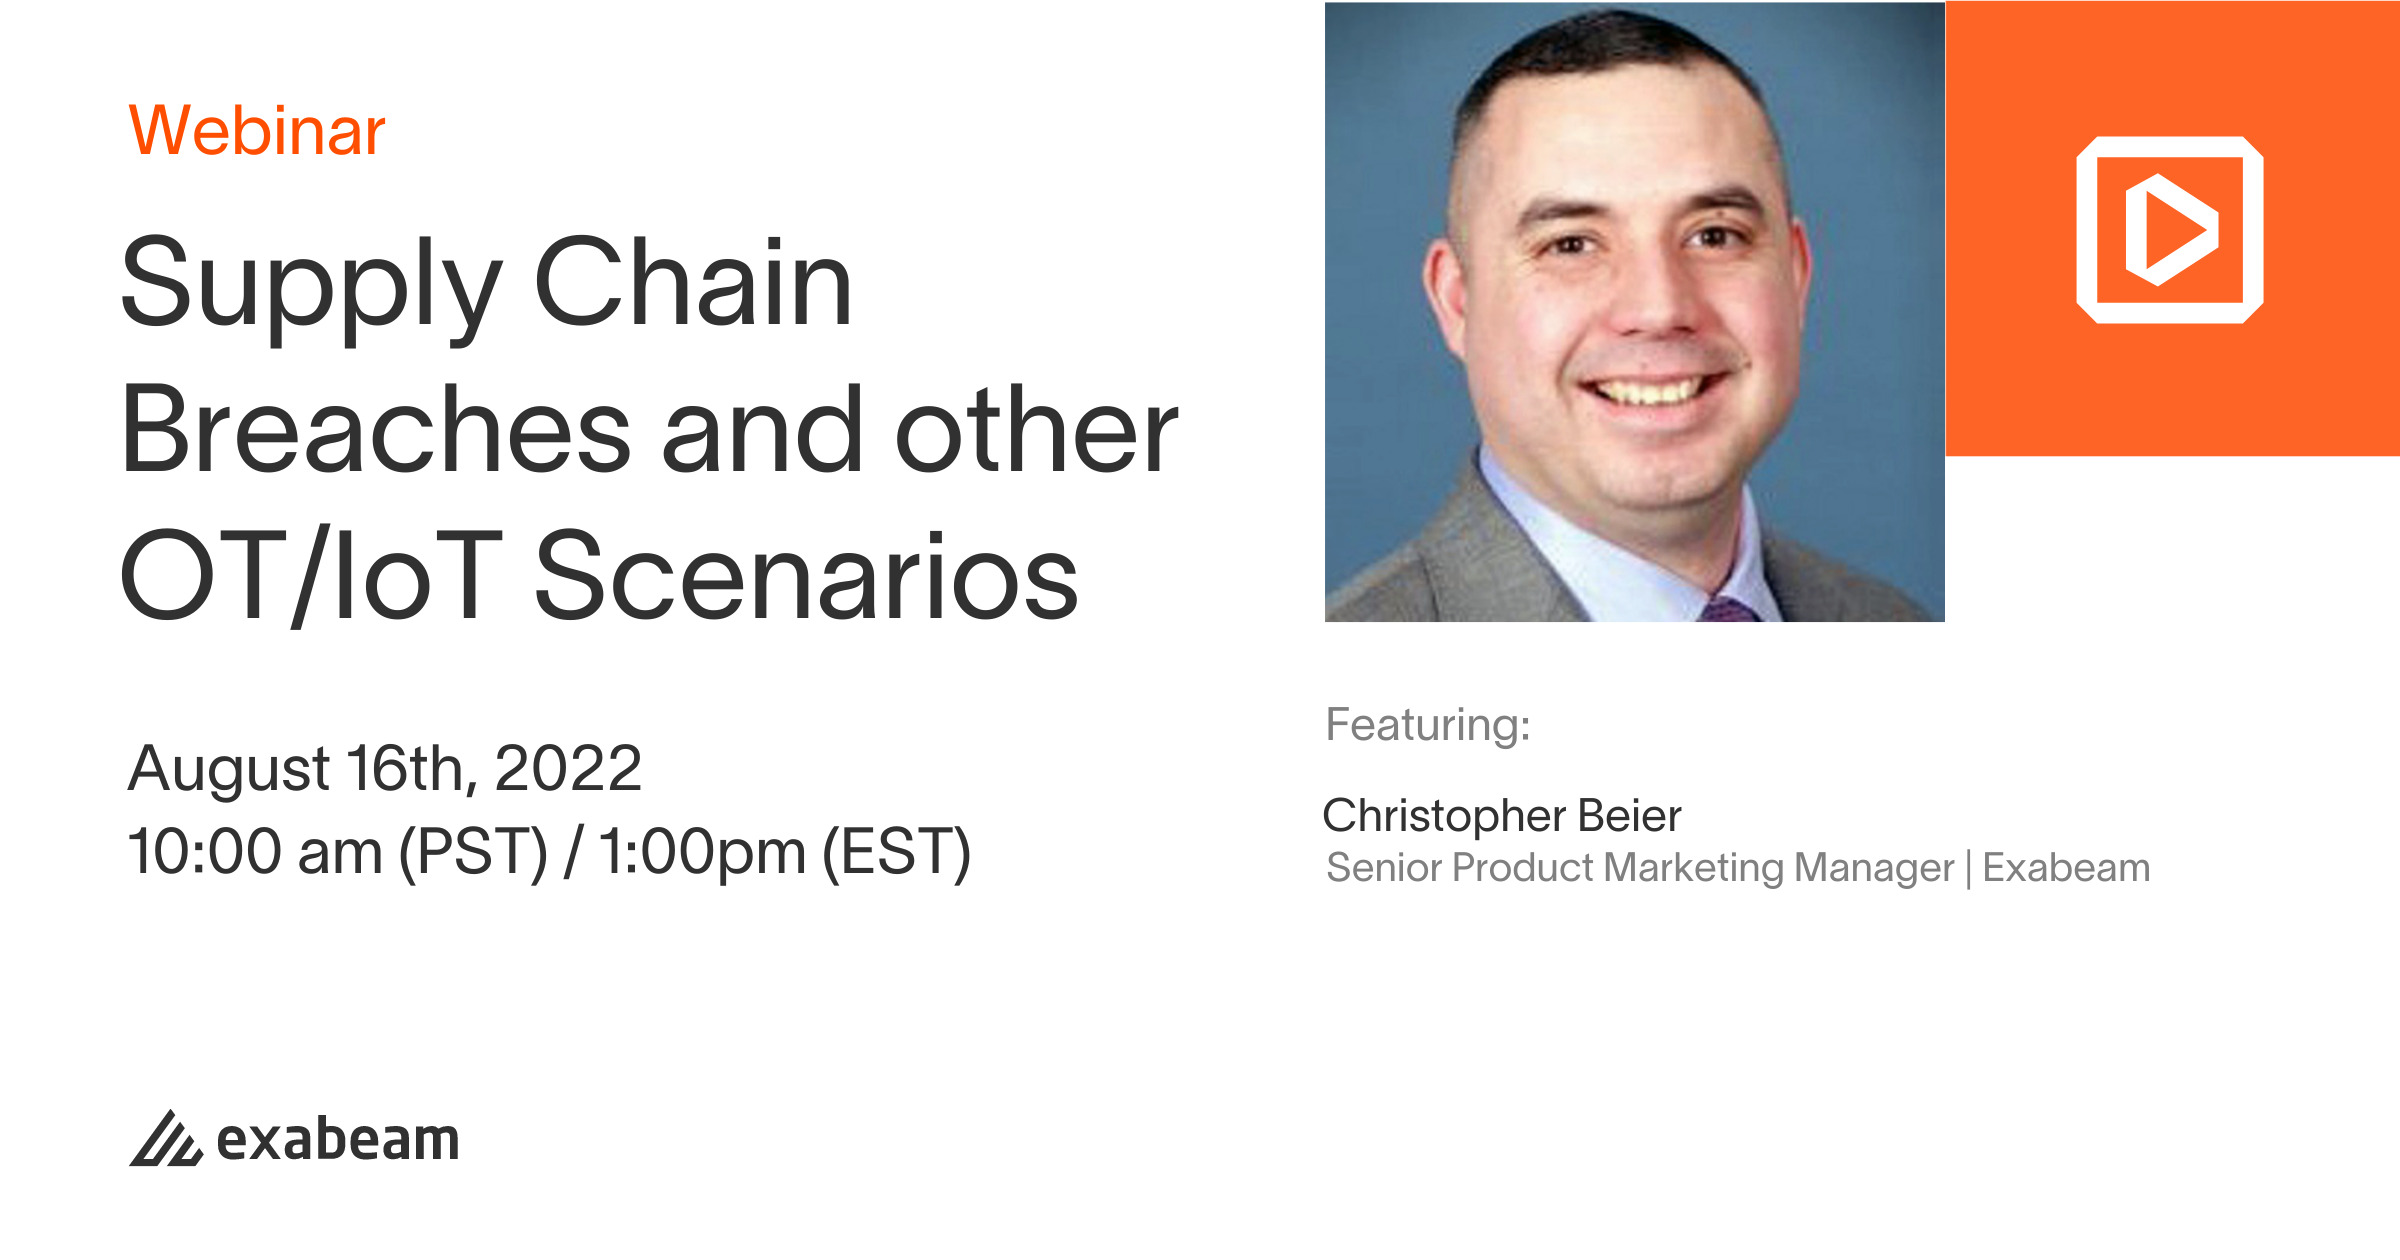 Supply Chain Breaches and other OT/IoT Scenarios